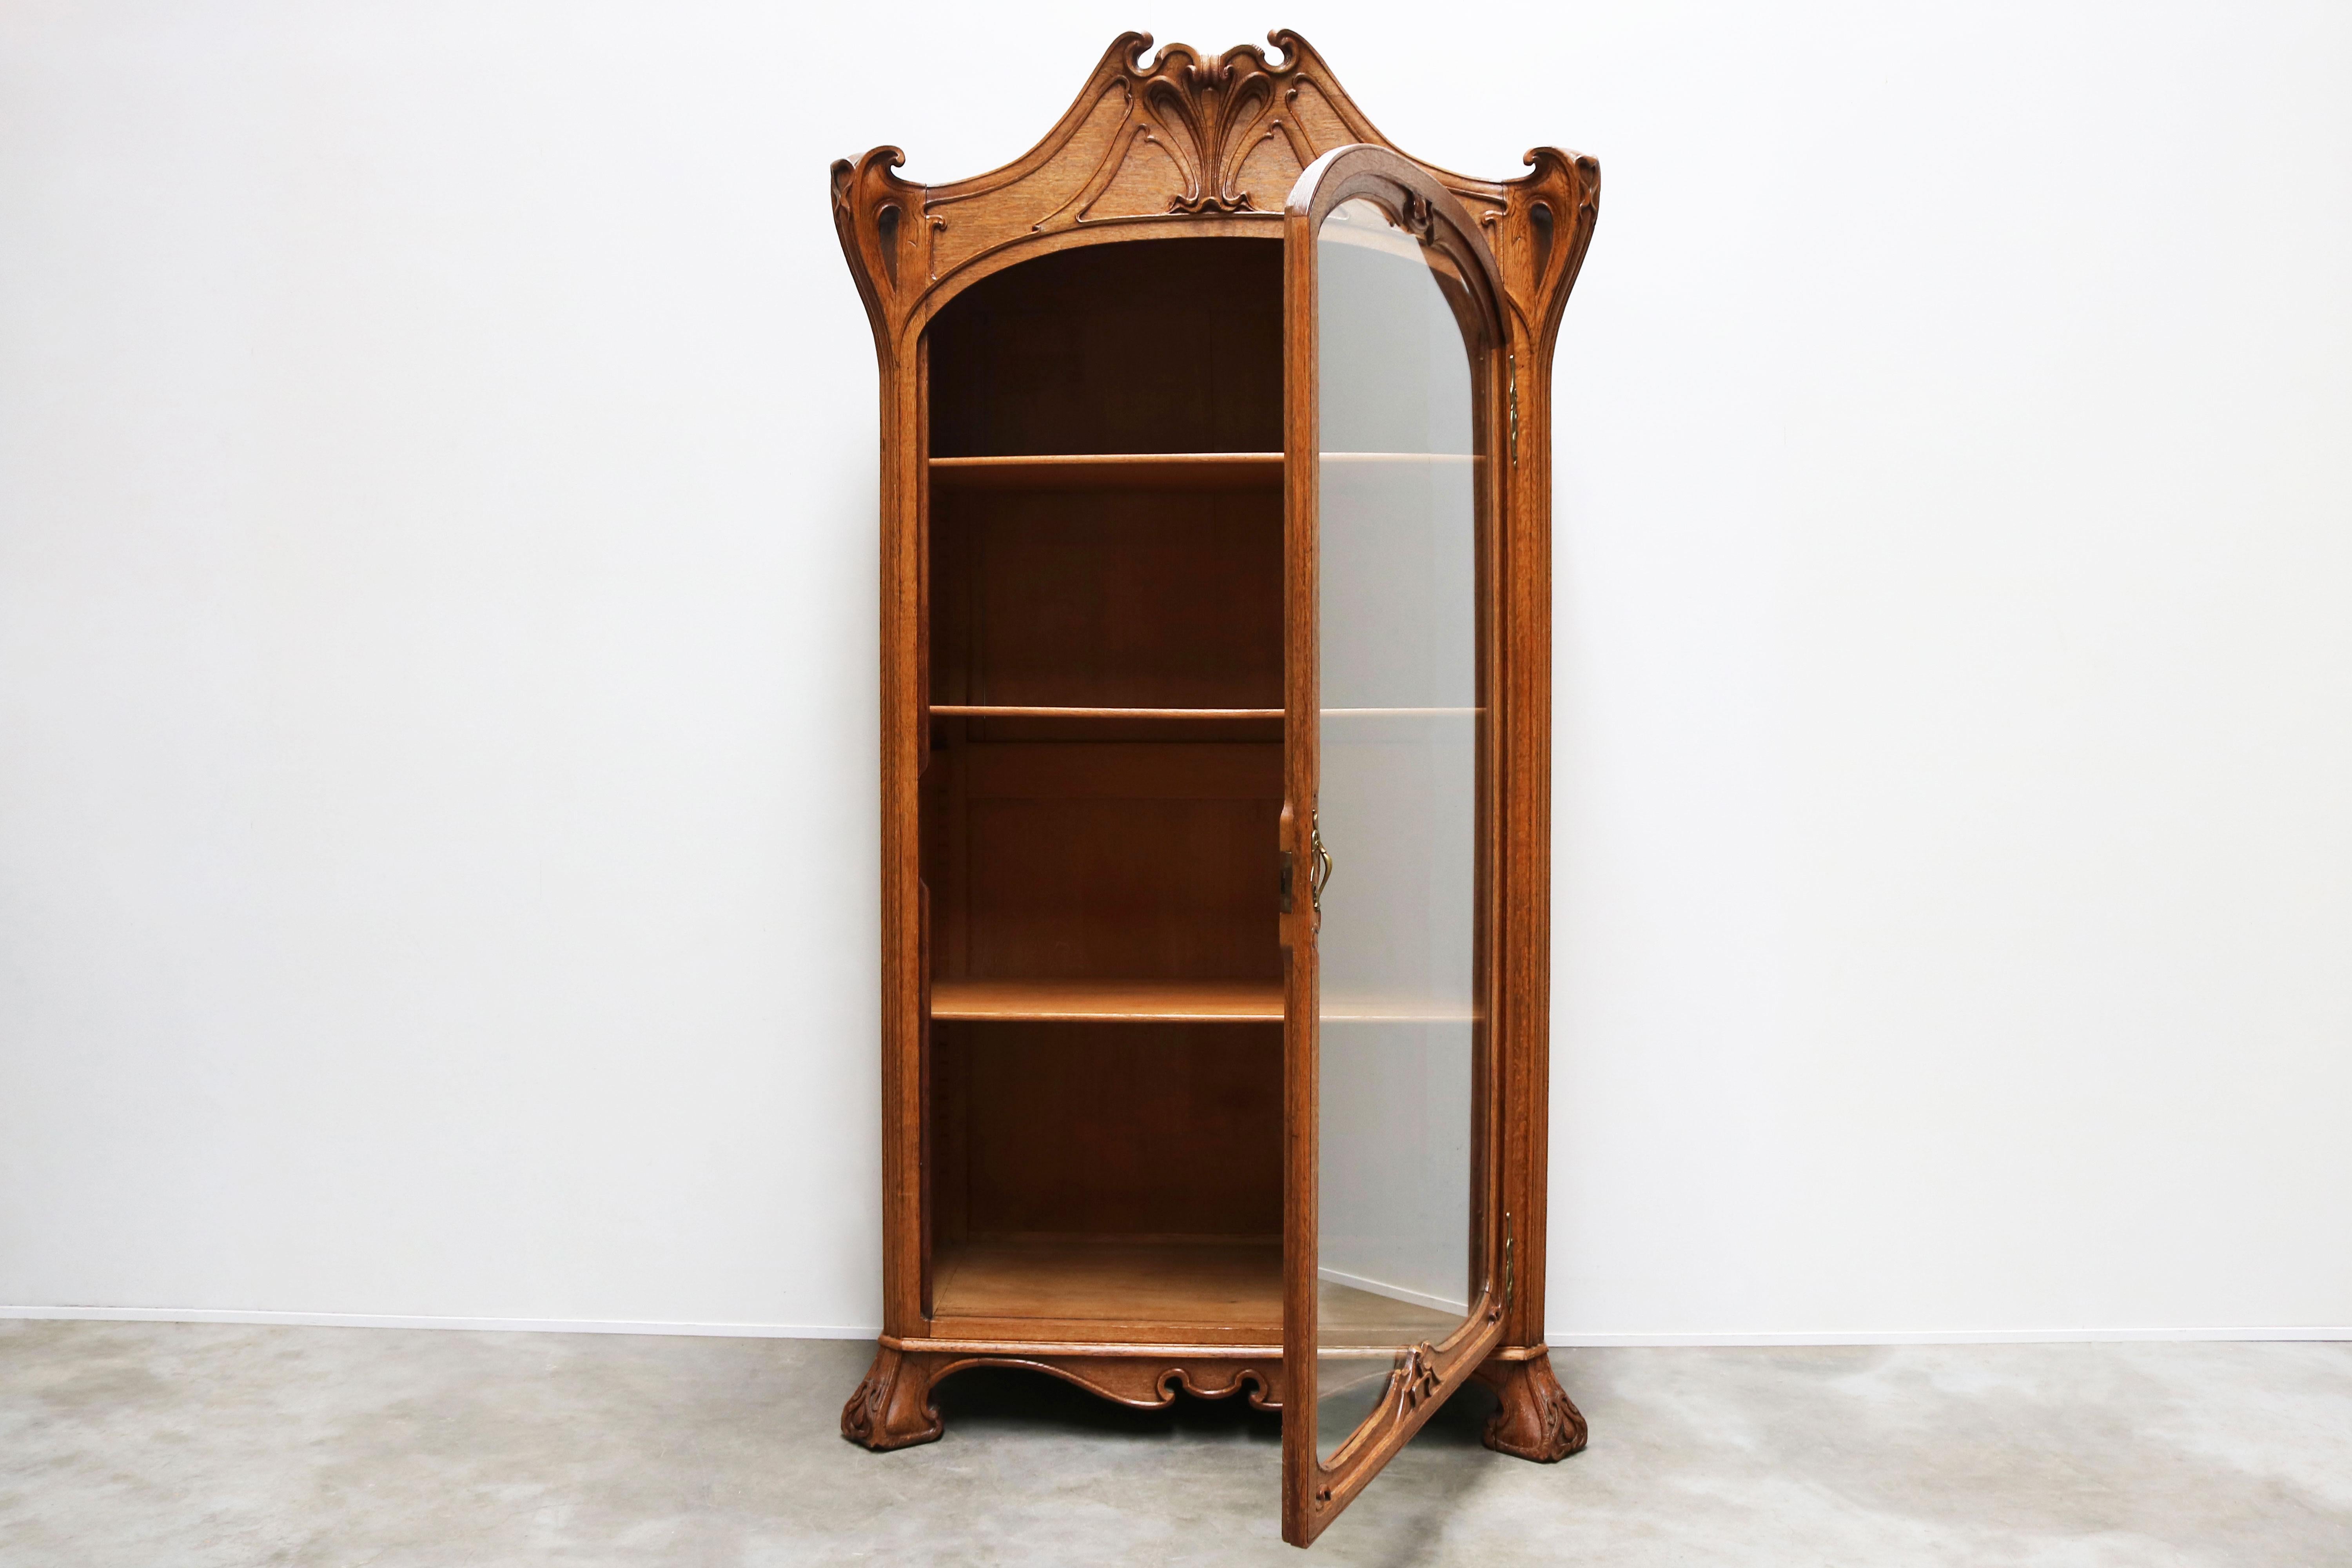 Exquisite French Art Nouveau Cabinet / Display cabinet by famous French architect / designer Henri Sauvage 1900.
A very large impressive cabinet that makes such a statement! 
Amazing attention to detail for example the Art Nouveau Design of the